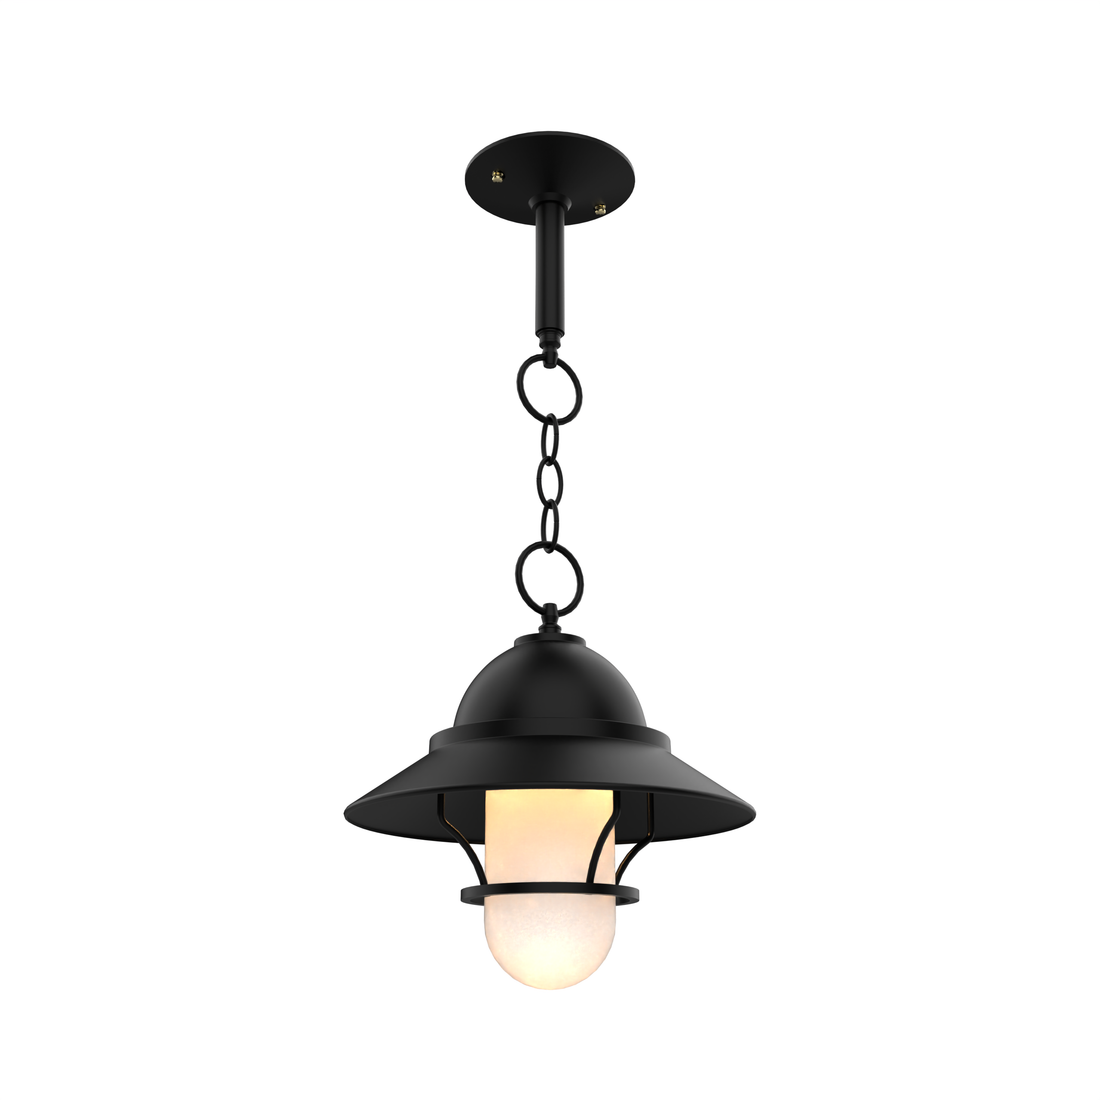 San Francisco - Chain ceiling mount with medium globe and grille - 22250